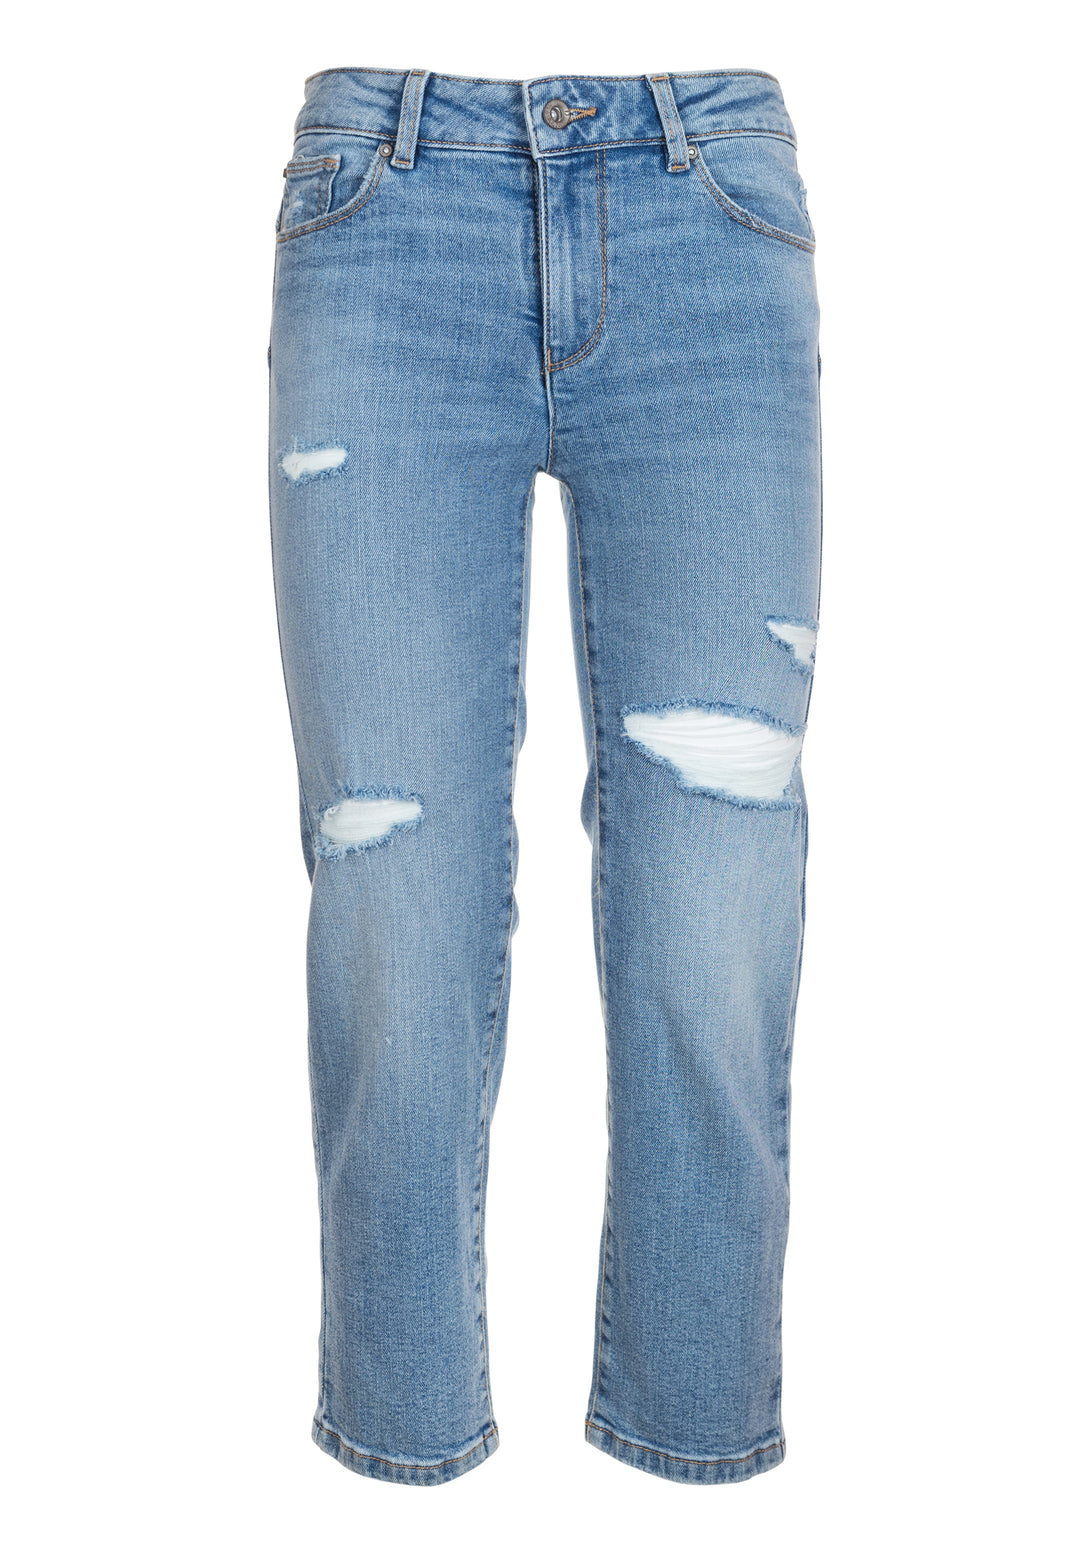 Jeans slim fit made in denim with middle wash Fracomina FP23SV8000D450P3-428-1